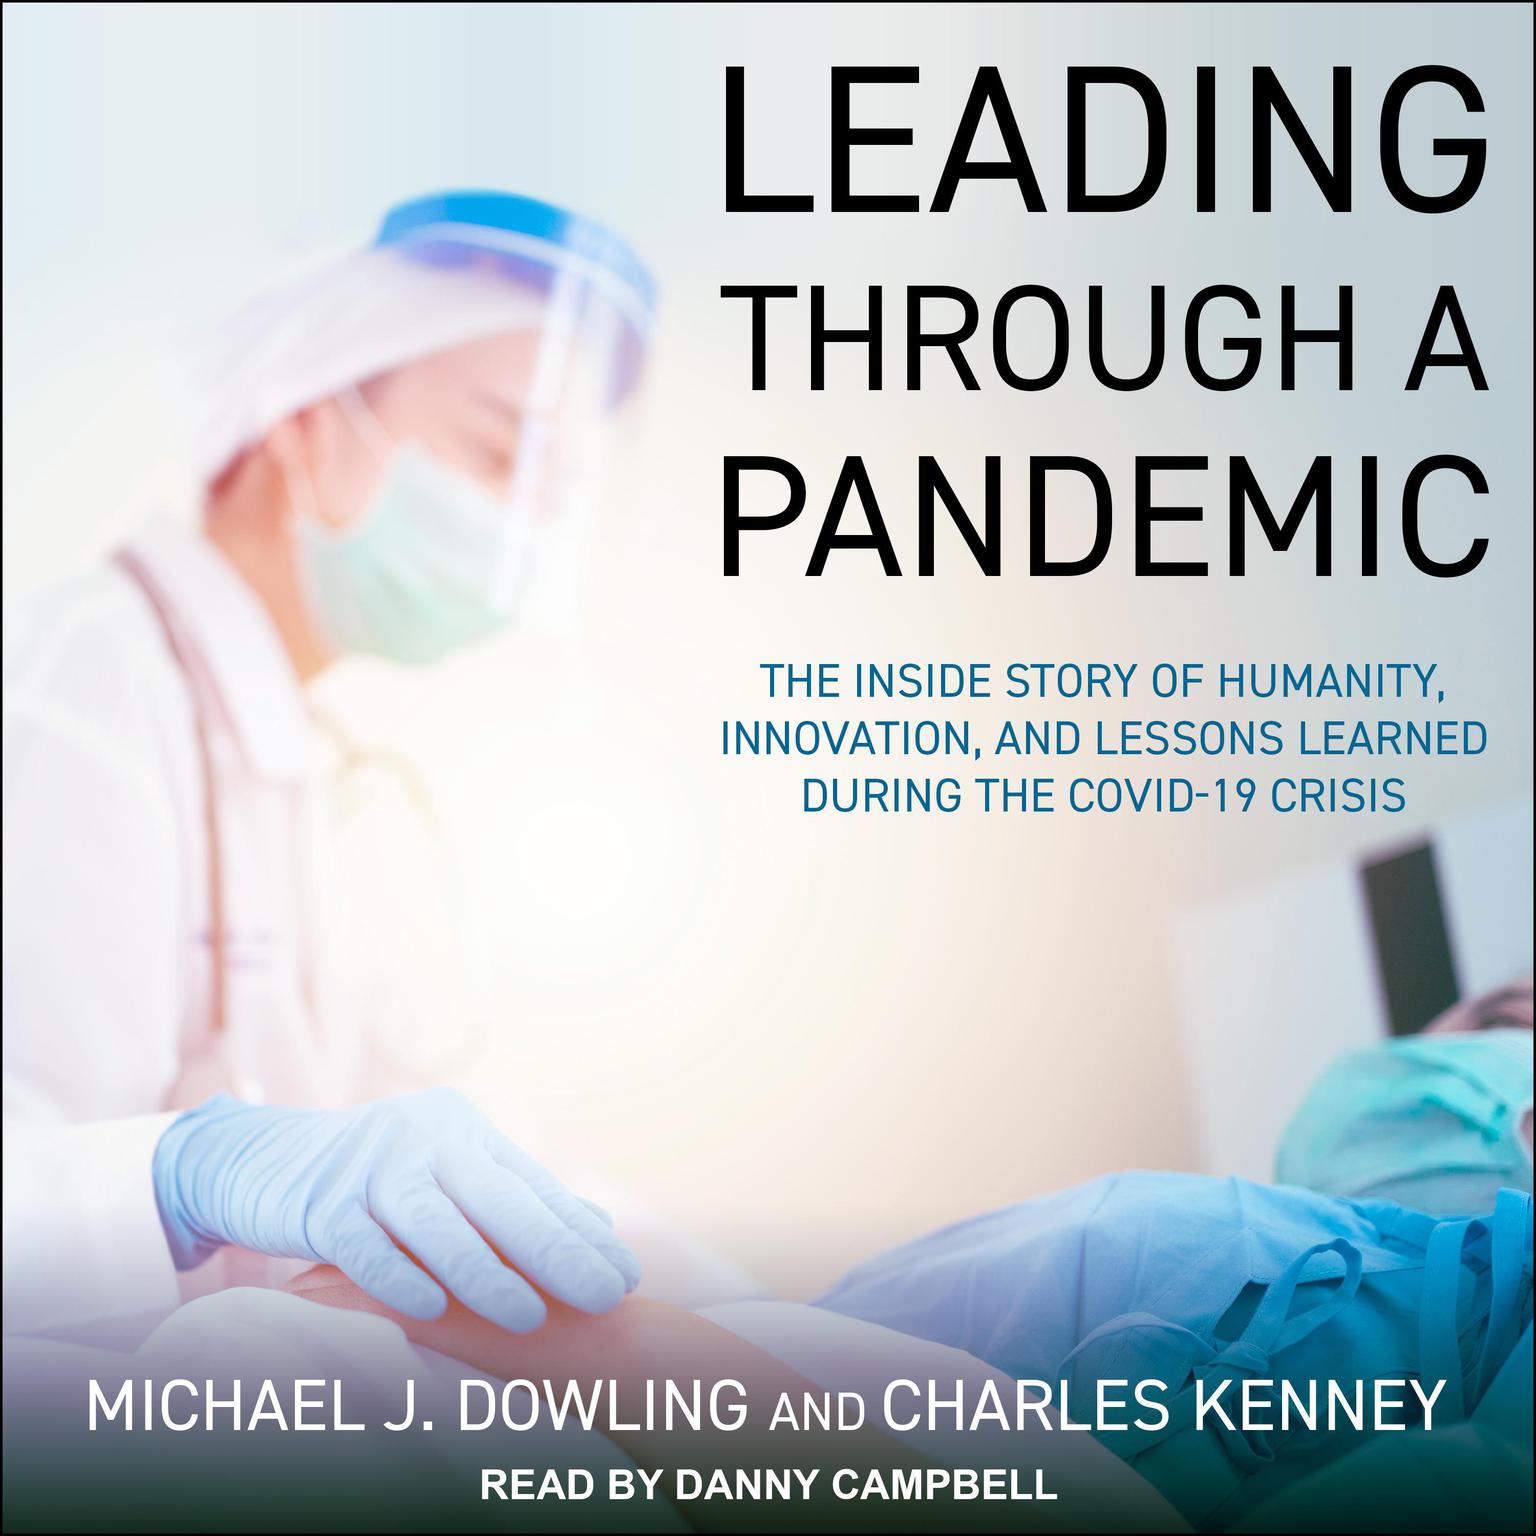 Leading Through A Pandemic: The Inside Story of Humanity, Innovation, and Lessons Learned During the COVID-19 Crisis Audiobook, by Charles Kenney